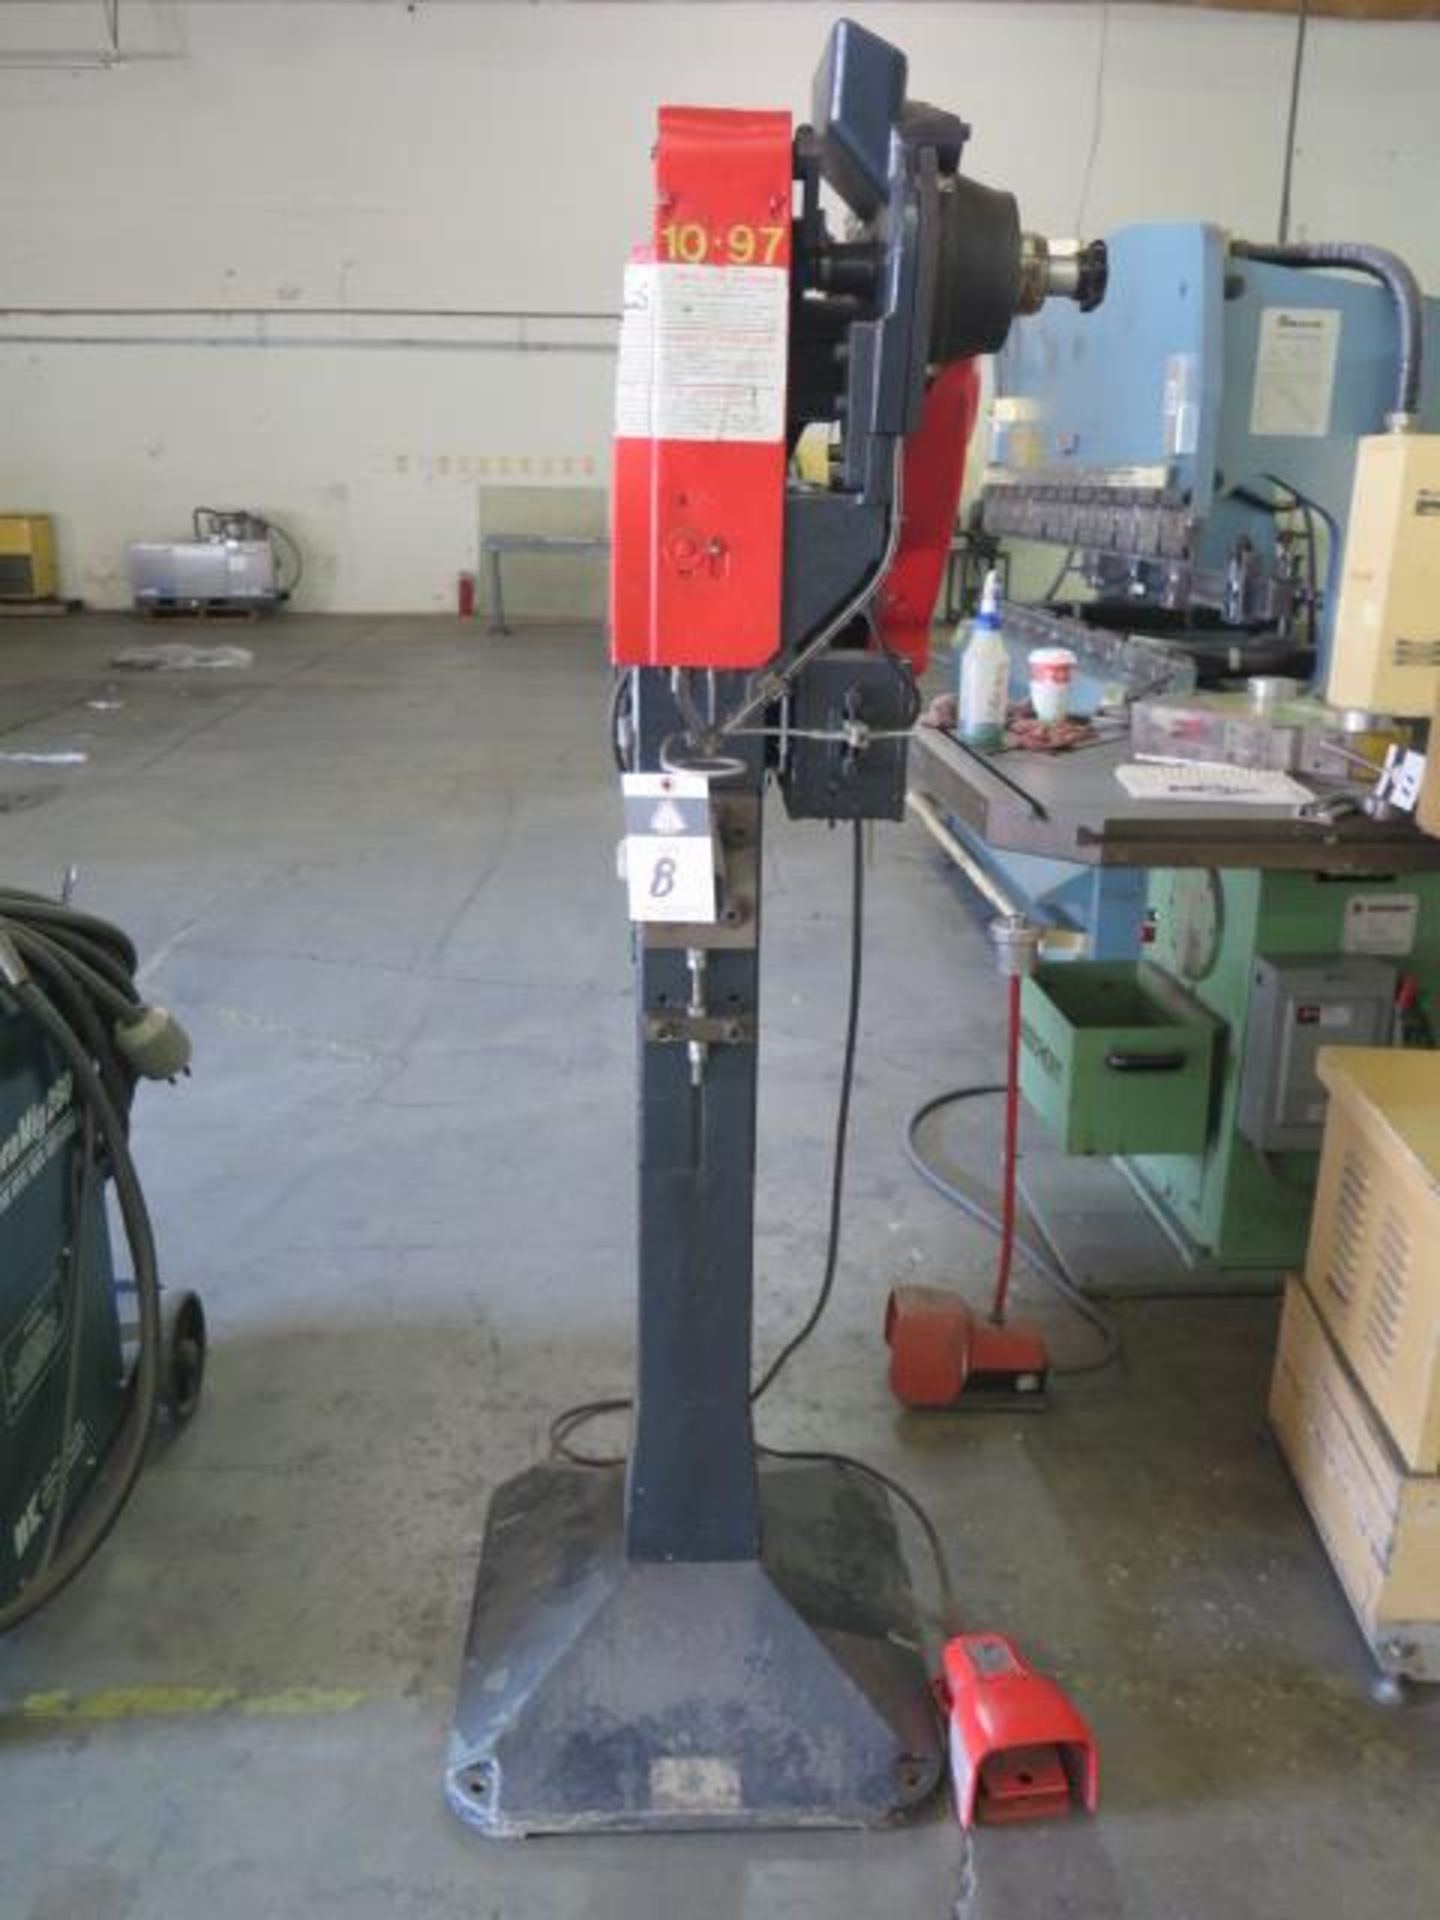 Milford mdl. 256 REV3 Automatic Riveter s/n 1273 w/ Feeder (SOLD AS-IS - NO WARRANTY) - Image 2 of 10